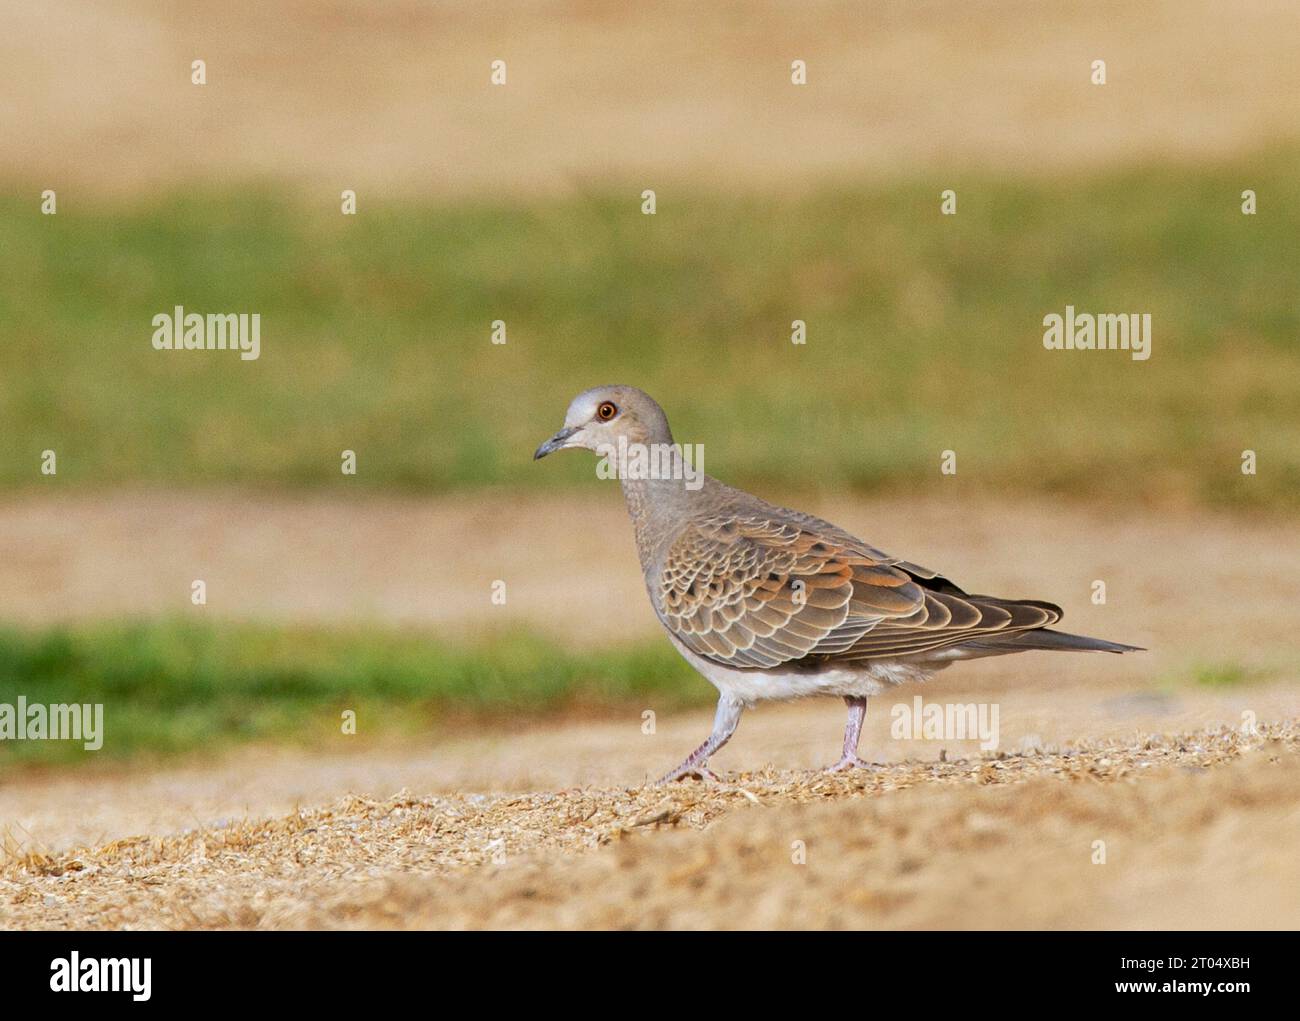 turtle dove (Streptopelia turtur), First winter showing mix of juvenile and adult type feathers, Walking on the ground, Egypt, El Gouna Stock Photo